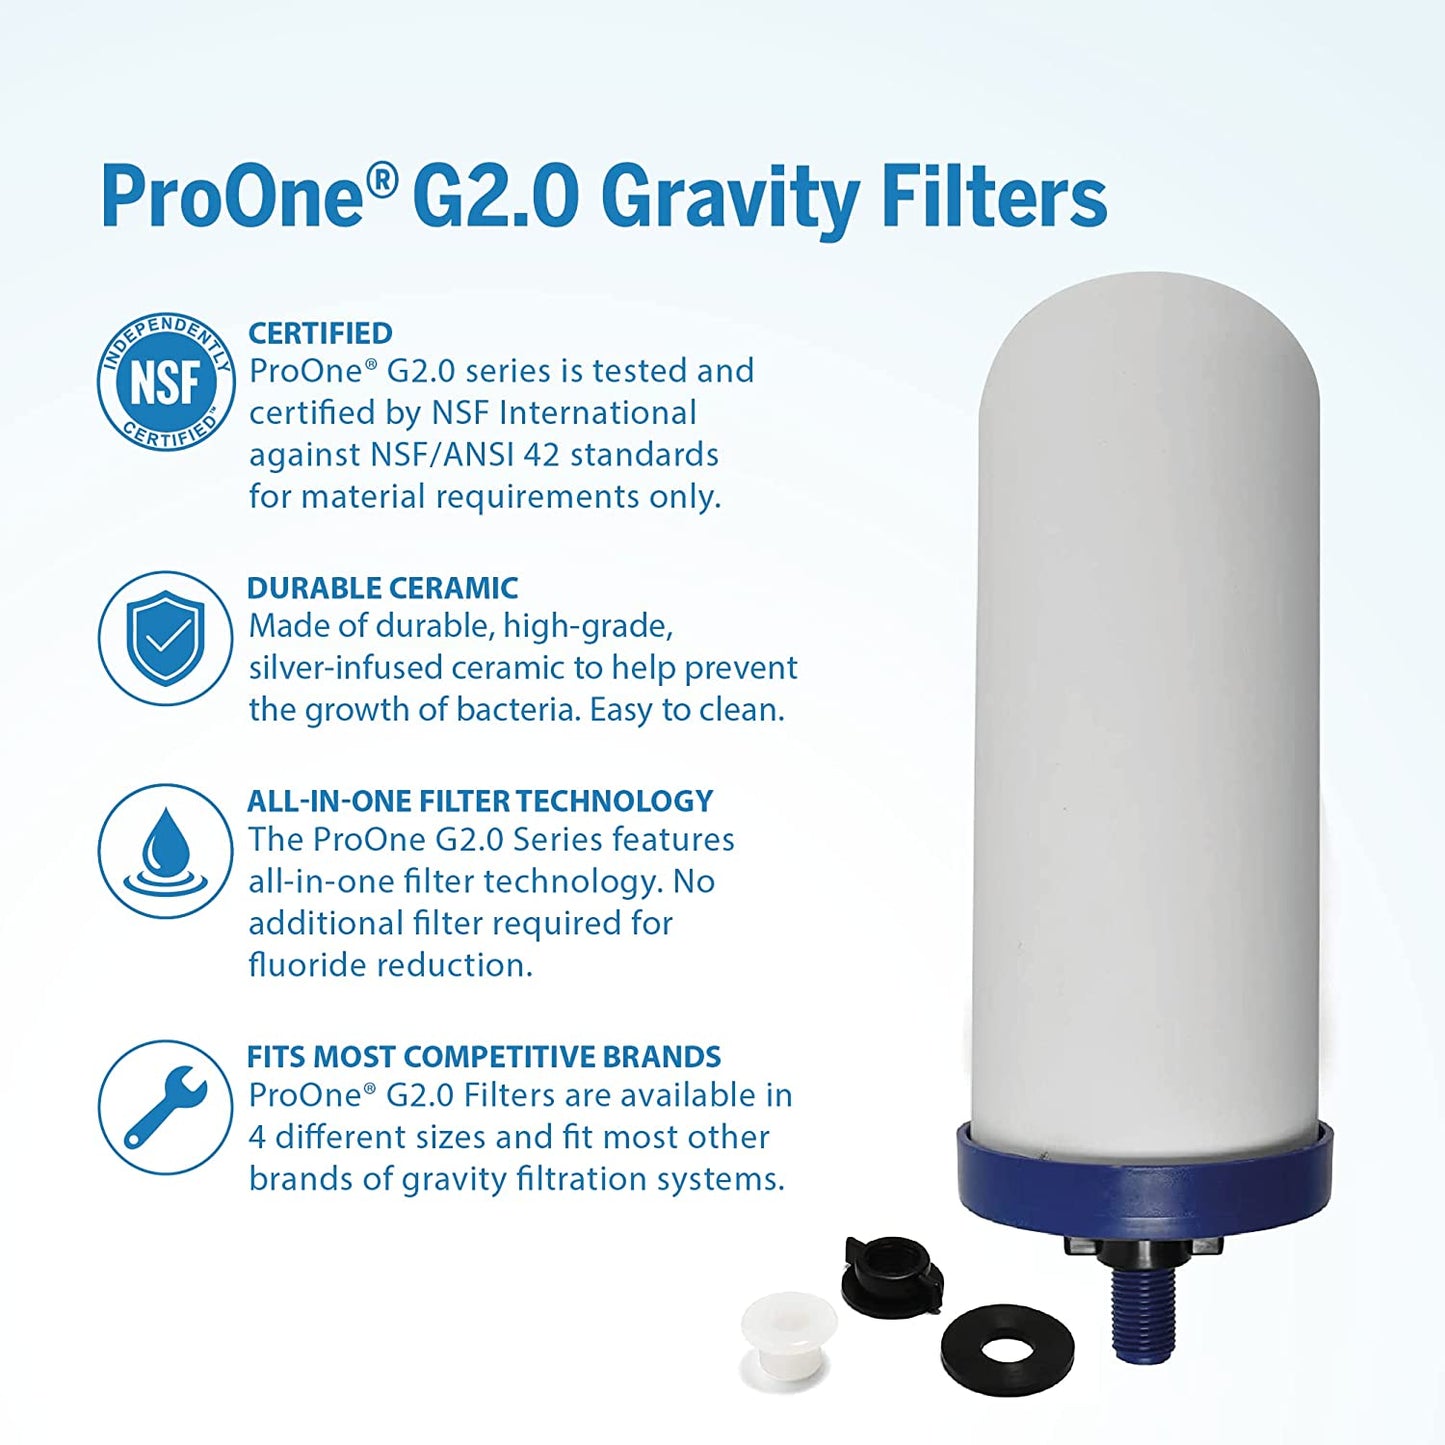 ProOne Big+ Stainless-Steel Gravity Water Filter System, 3-Gallon Water Capacity, Countertop Water Dispenser for Home, Camping, and Travel w/ (3) 9-inch Filters & Wire Stand